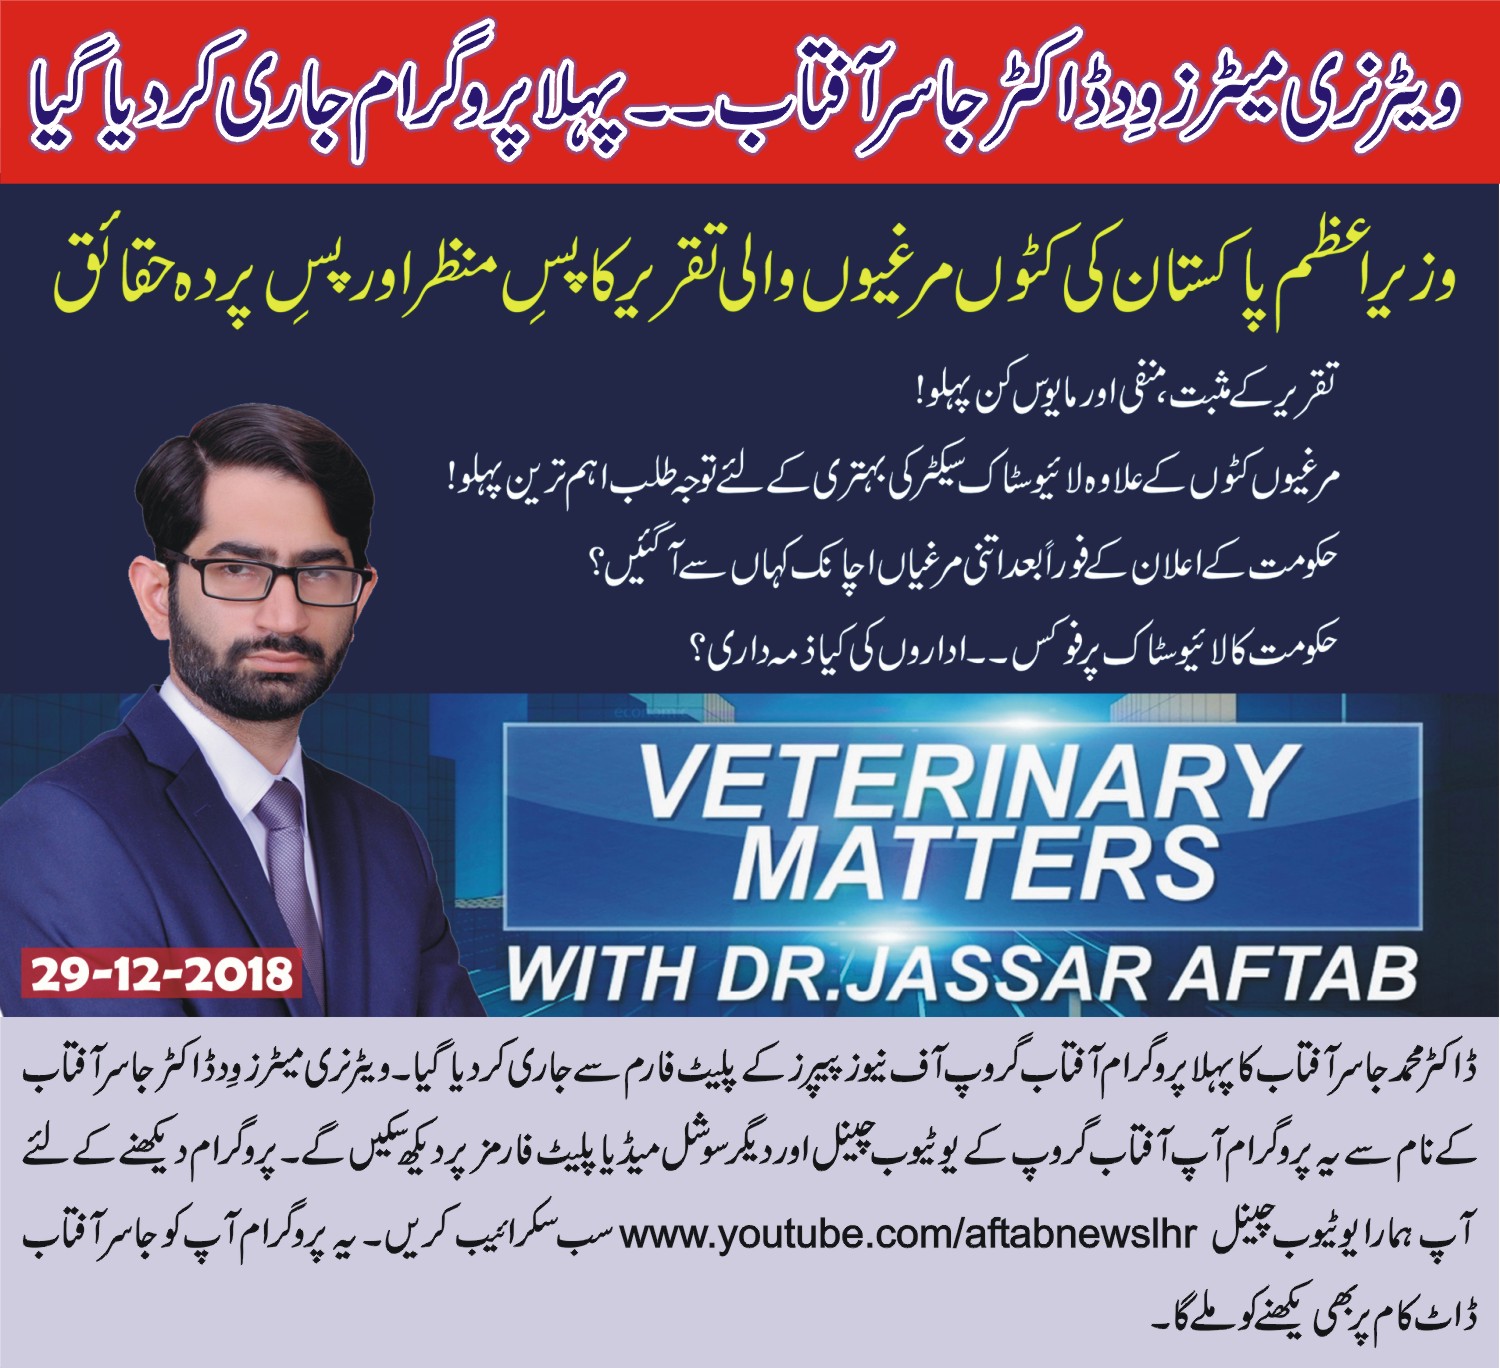 A Veterinary Show - Veterinary Matters with Dr. Jassar Aftab